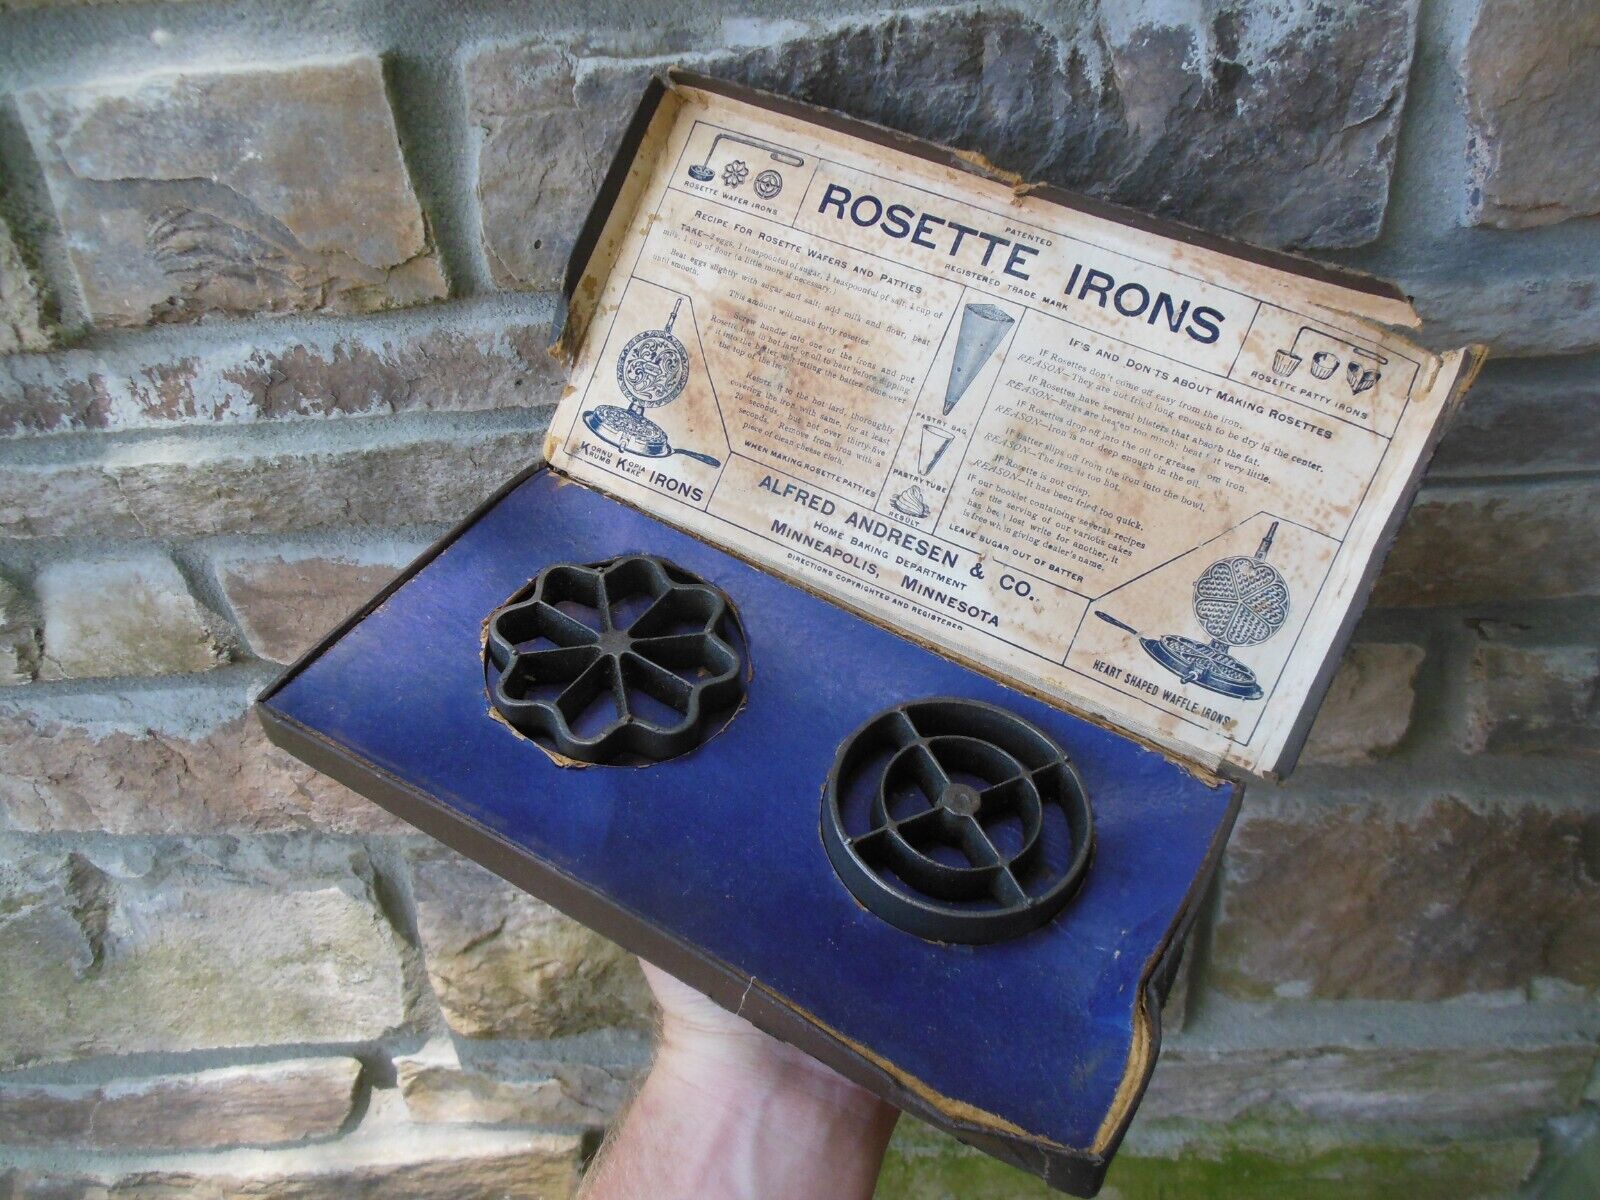 VINTAGE 1905 ALFRED ANDRESEN CAST IRON ROSETTES IN ORIGINAL BOX PATTY IRONS